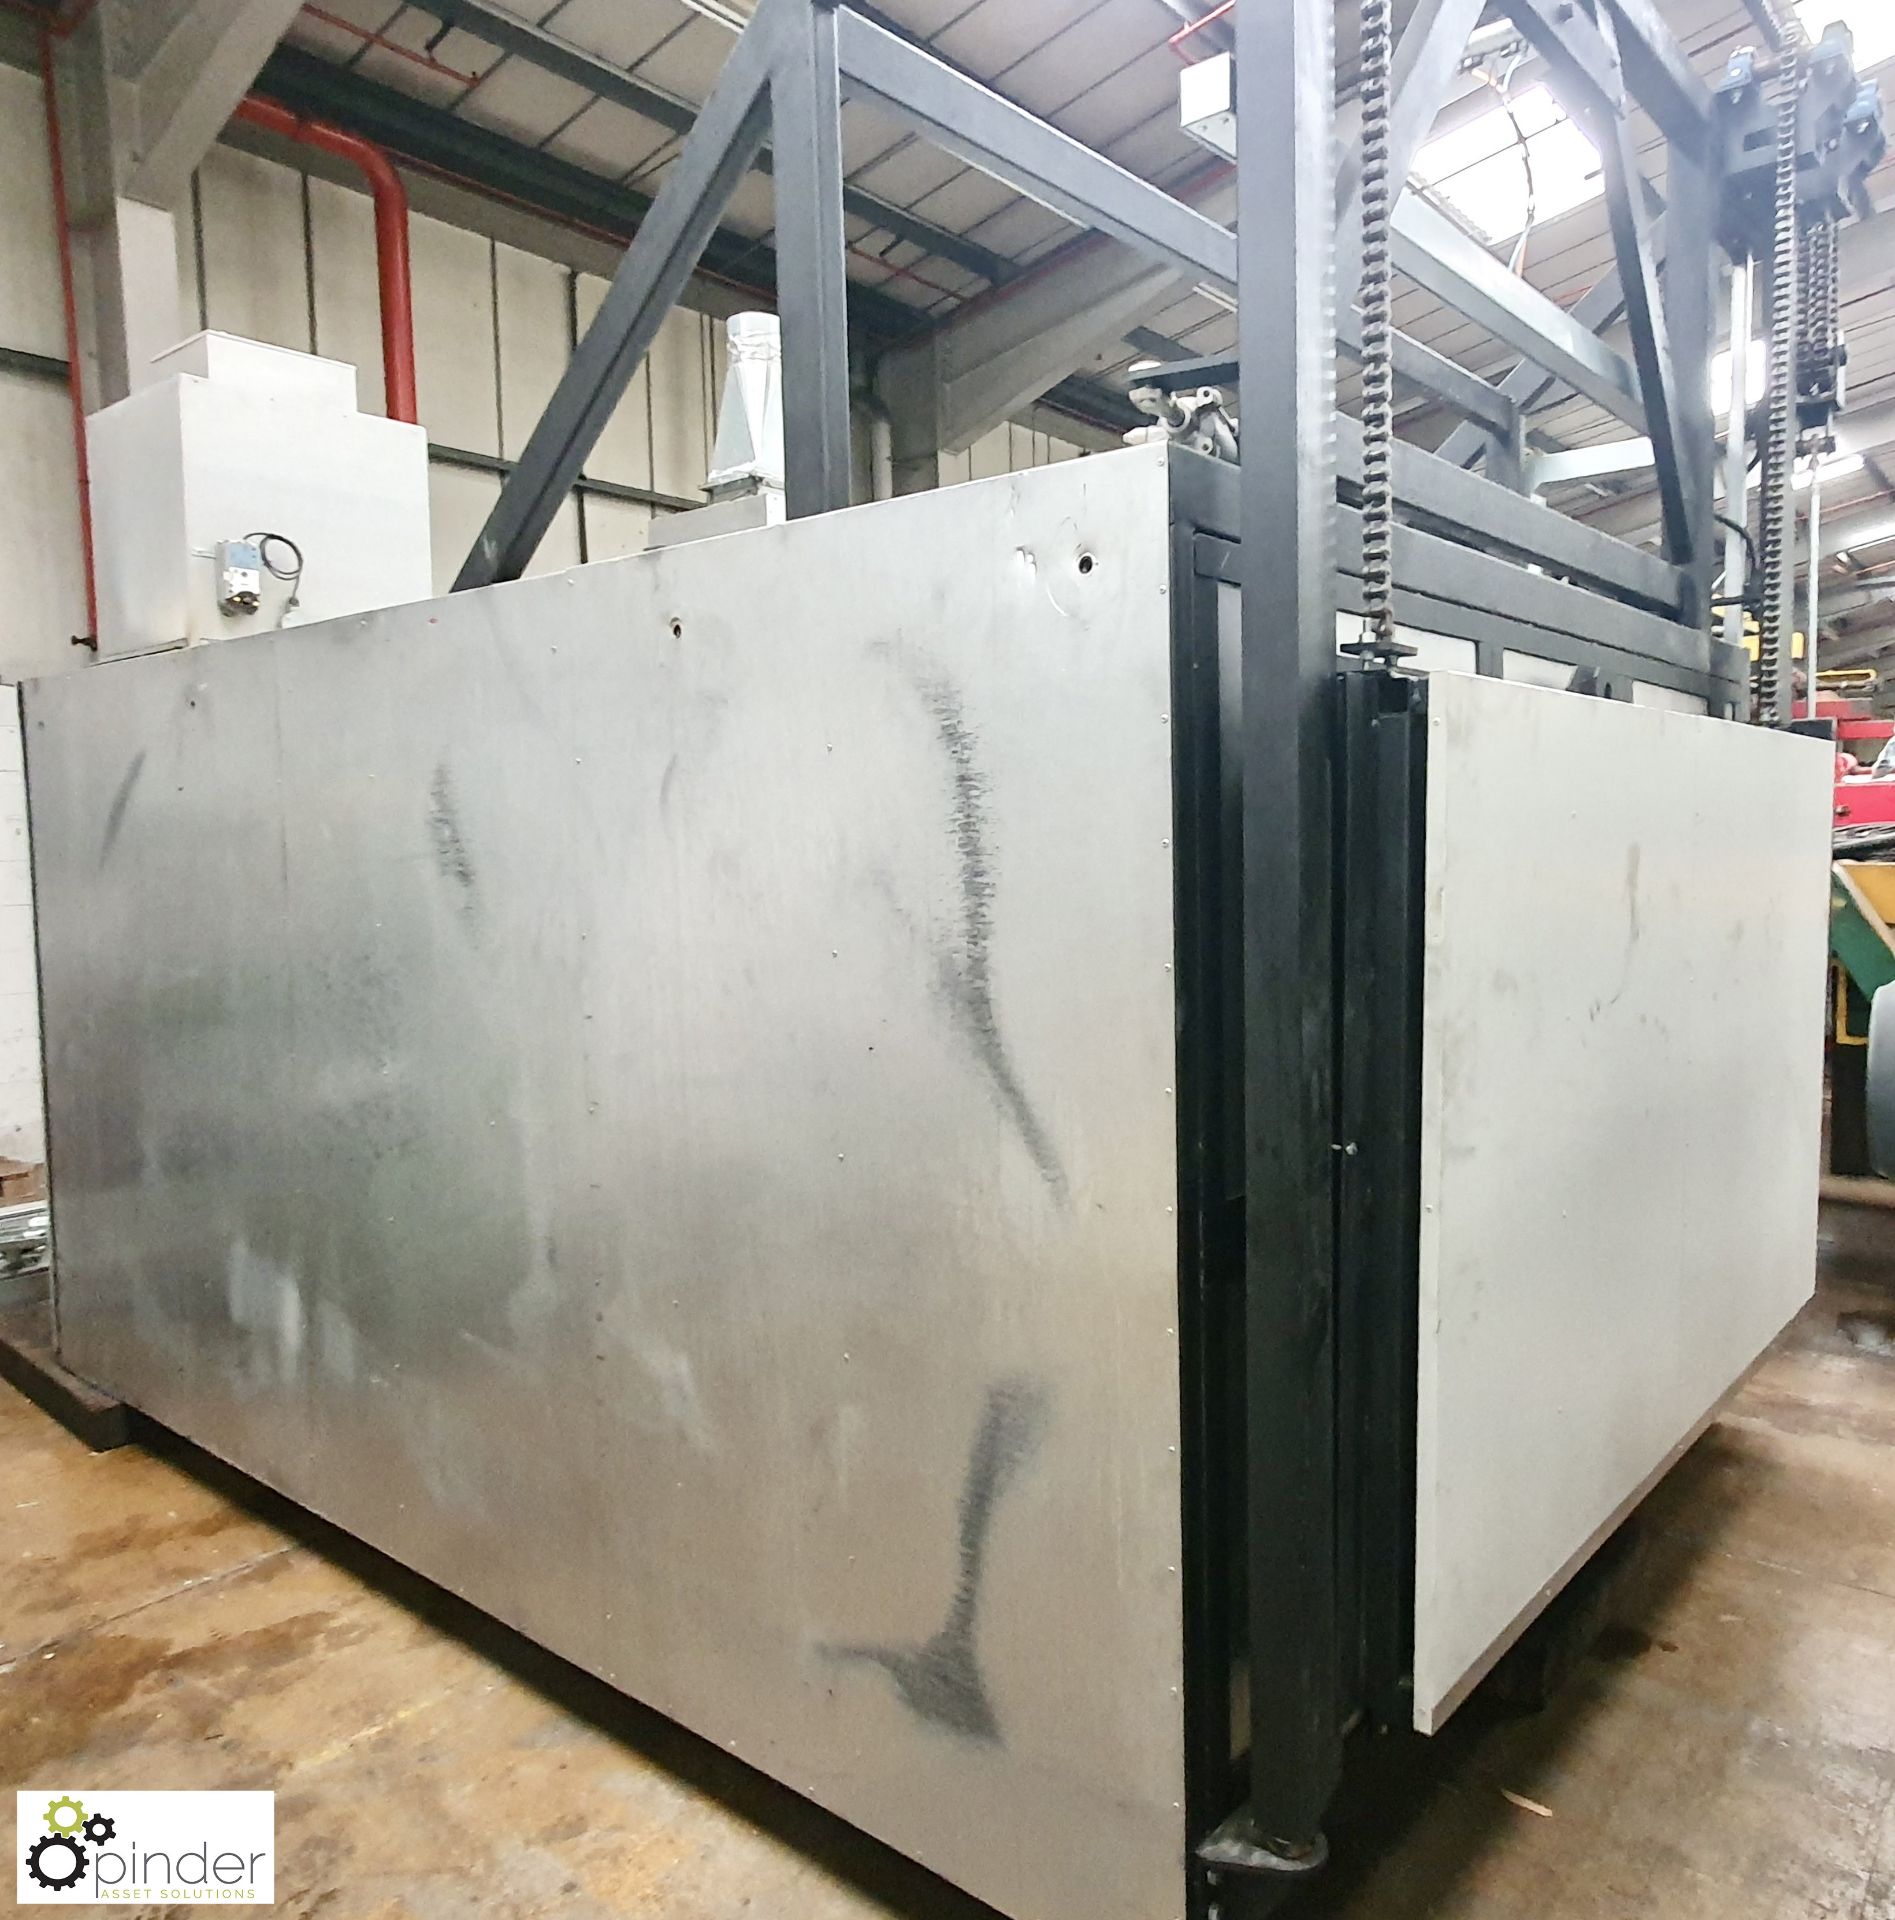 Caltherm Paint Oven freestanding medium sized gas fired Box Oven, year 2017, serial number - Image 5 of 15